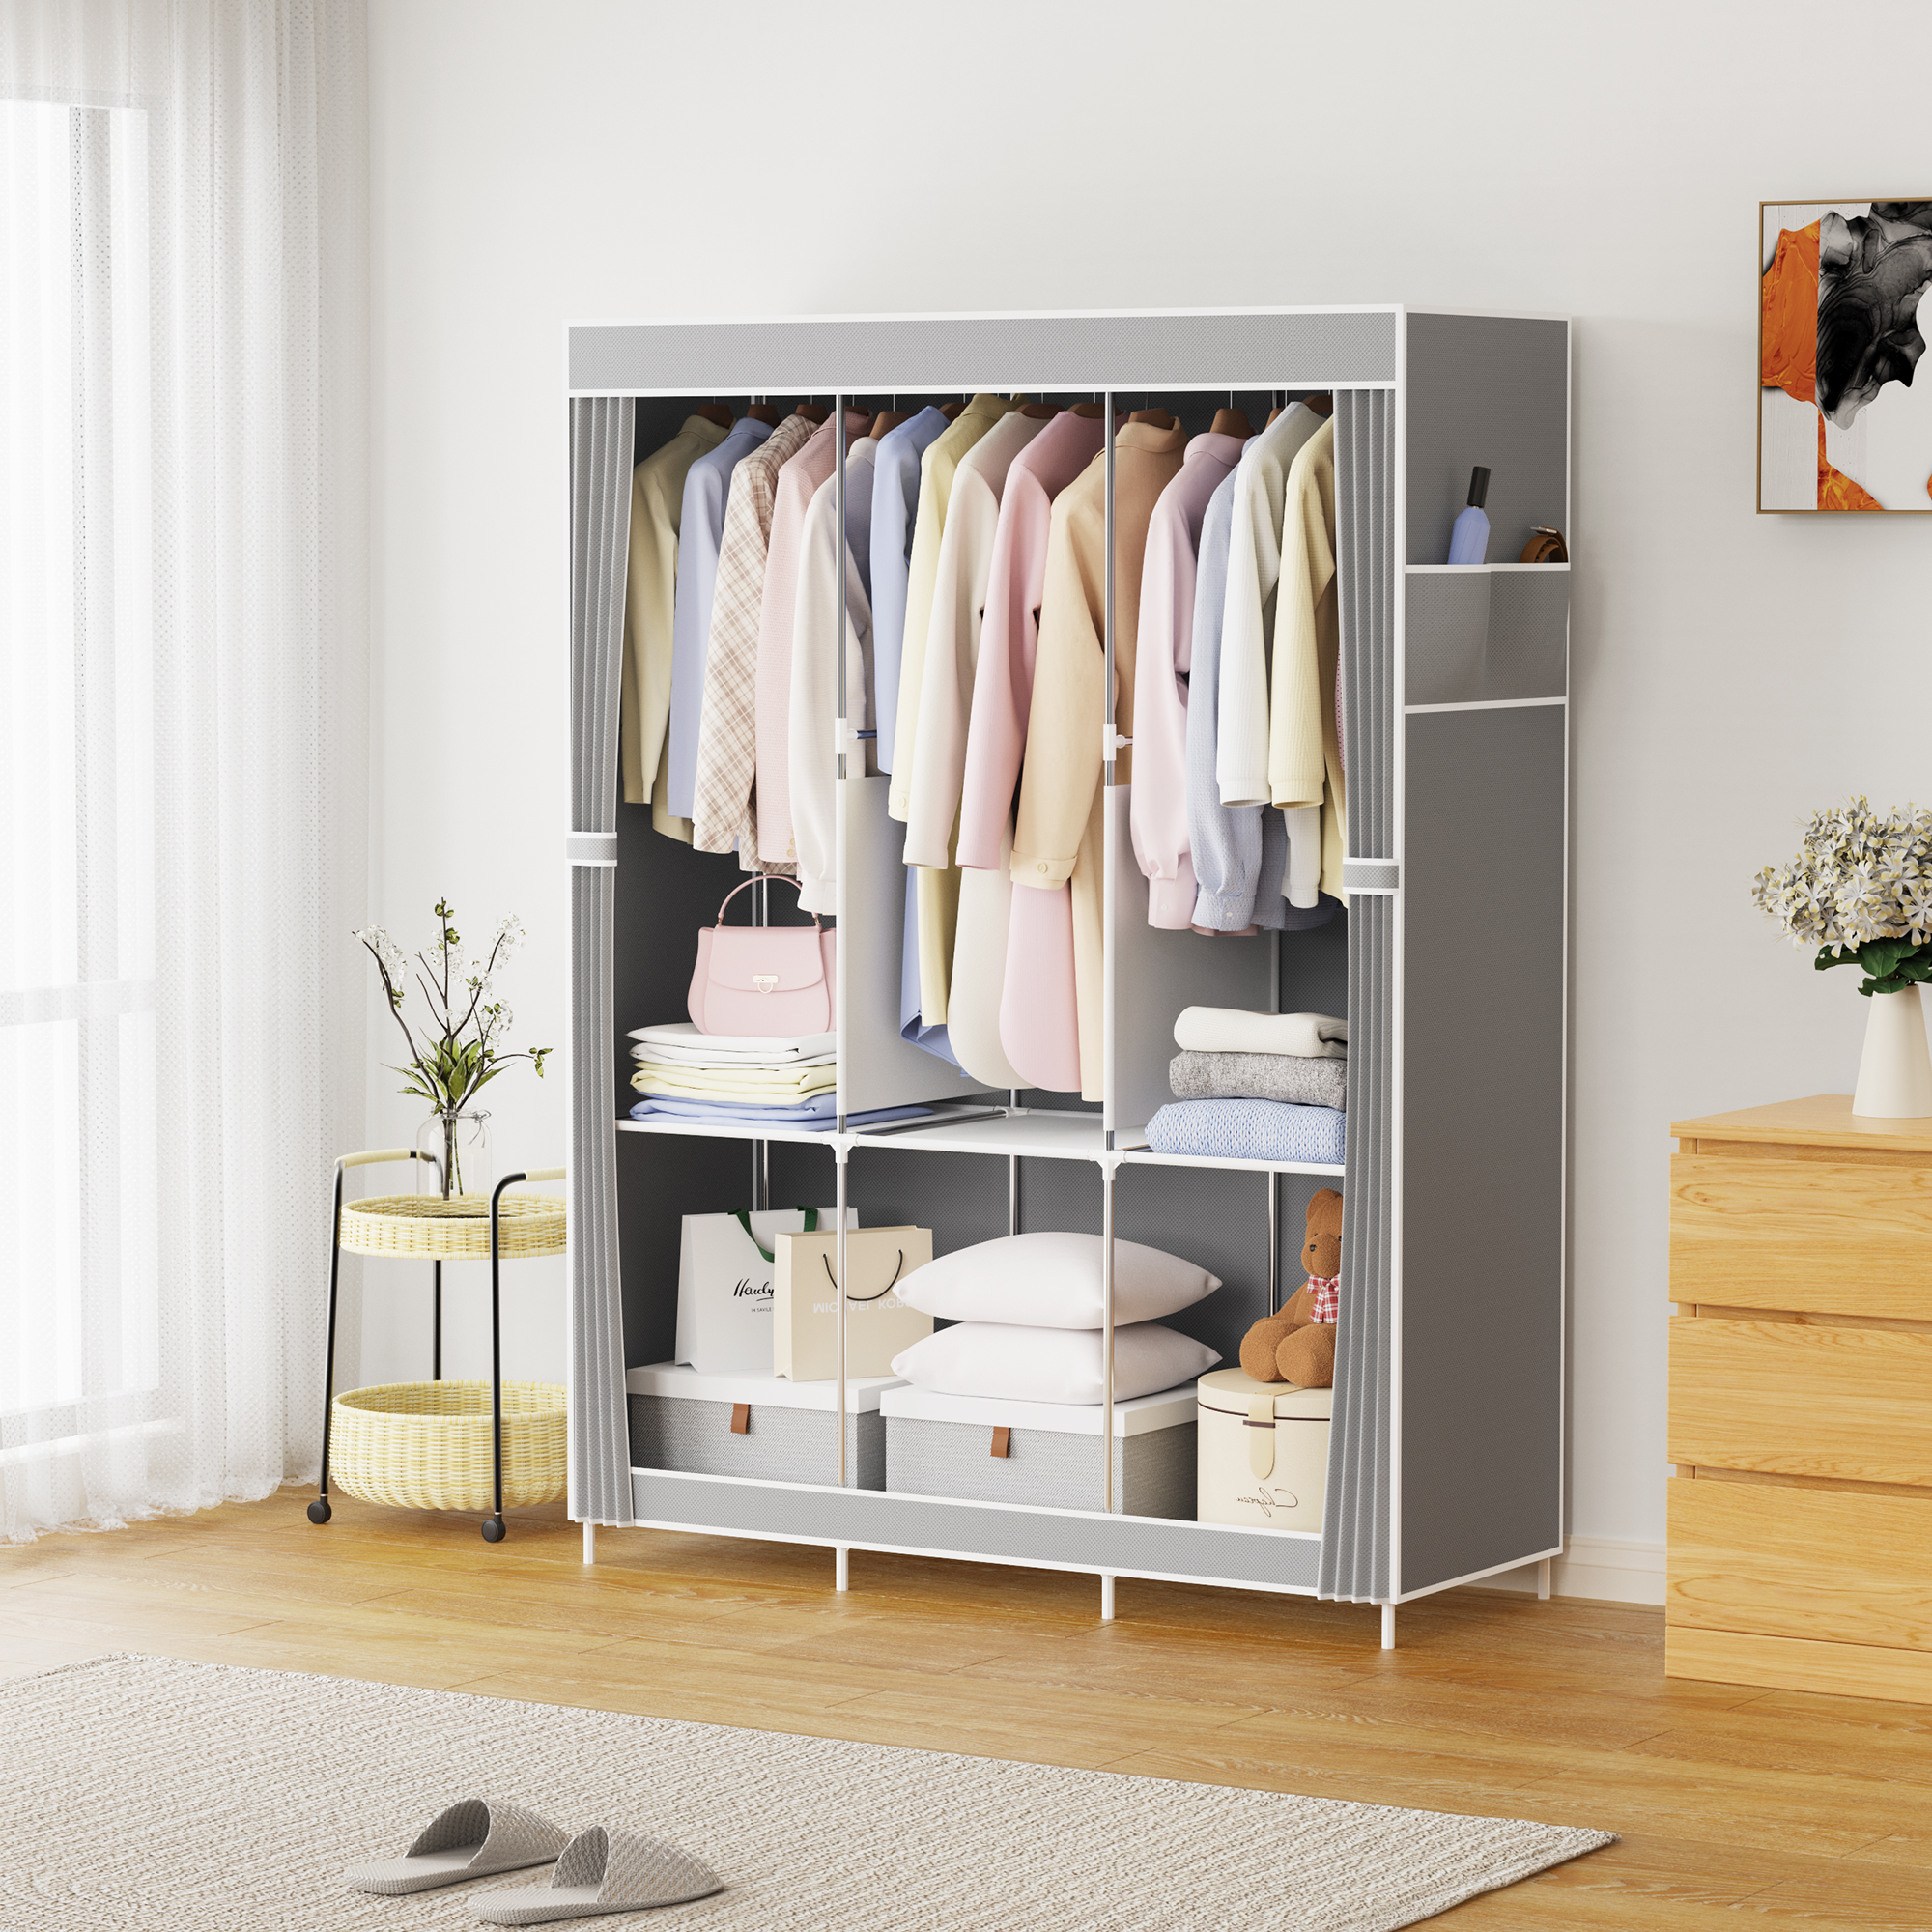 Riousery Portable Closet Wardrobe for Hanging Clothes  6 Storage Organizer Shelves Closet for Bedroom Free Standing Clothes Rack with Cover, Grey - image 3 of 7